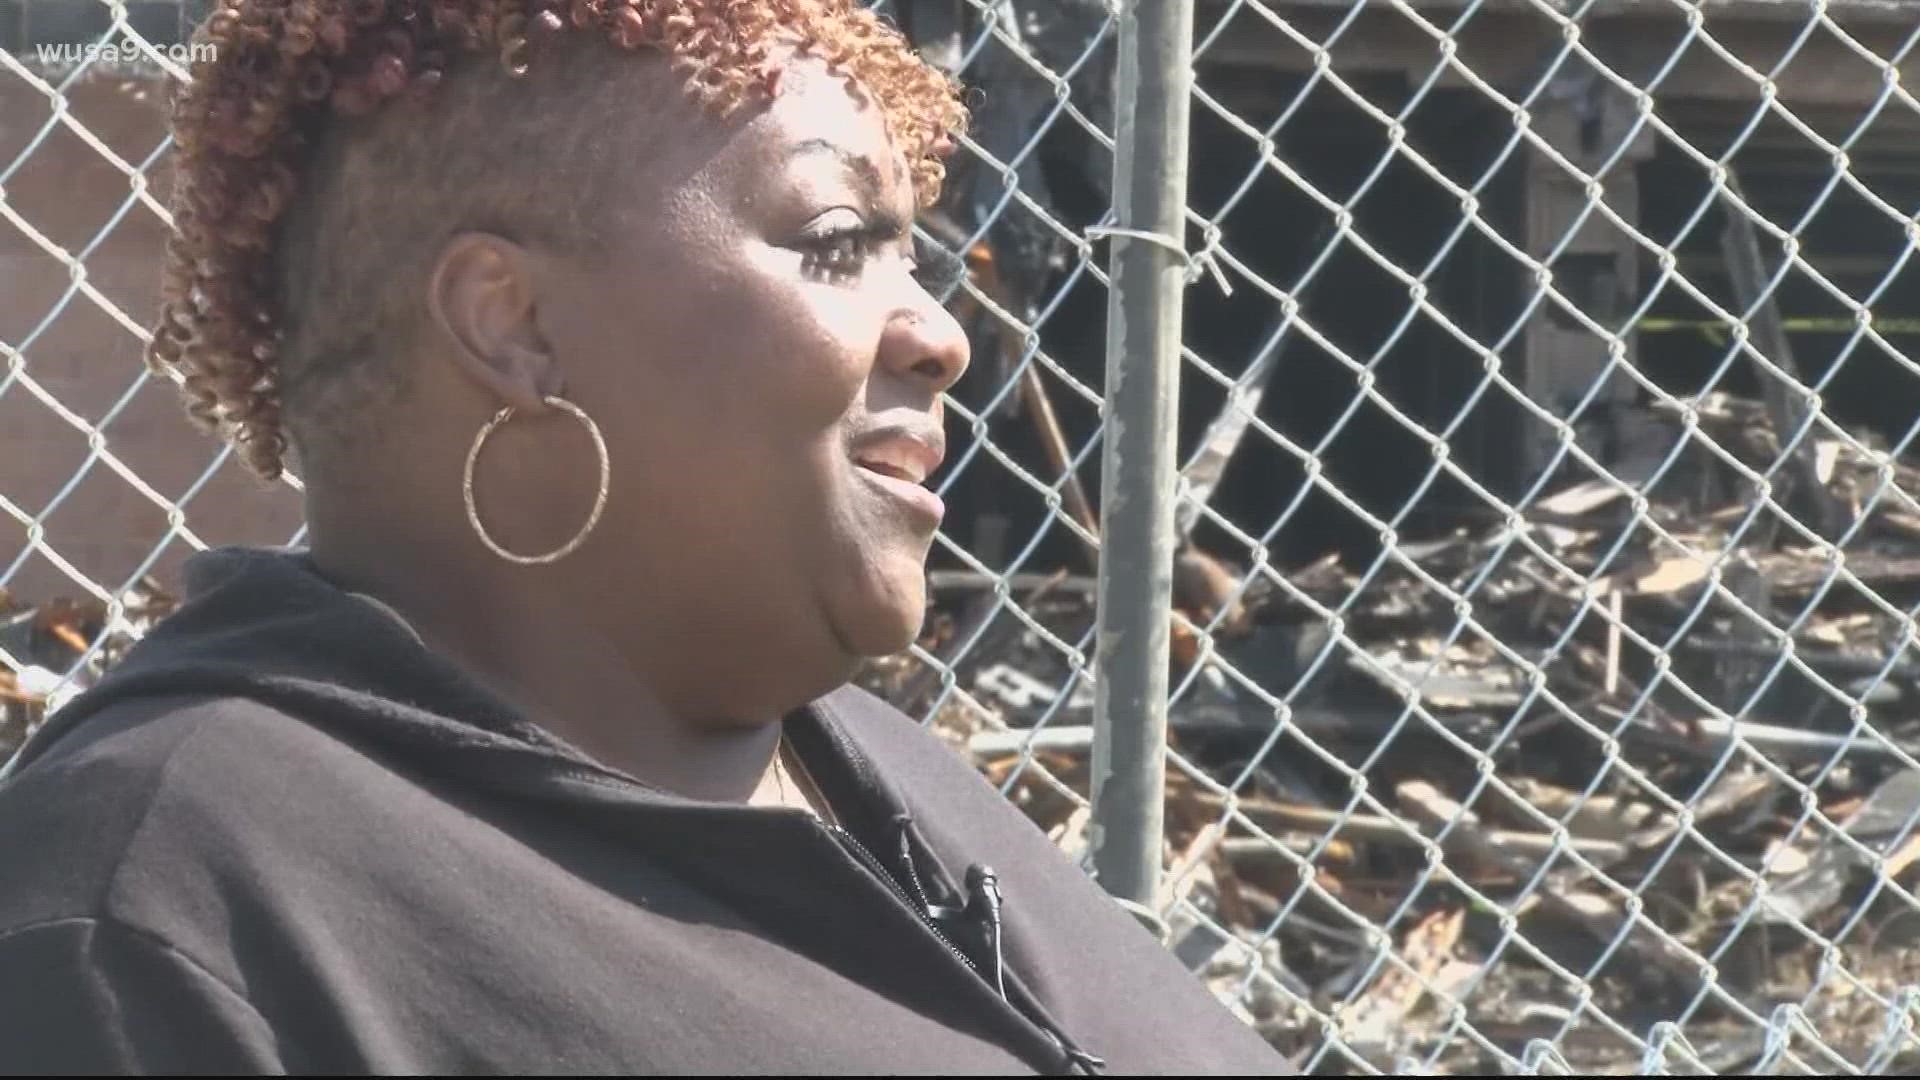 Vocalist Karen Linette is one of the dozens displaced from the explosion.